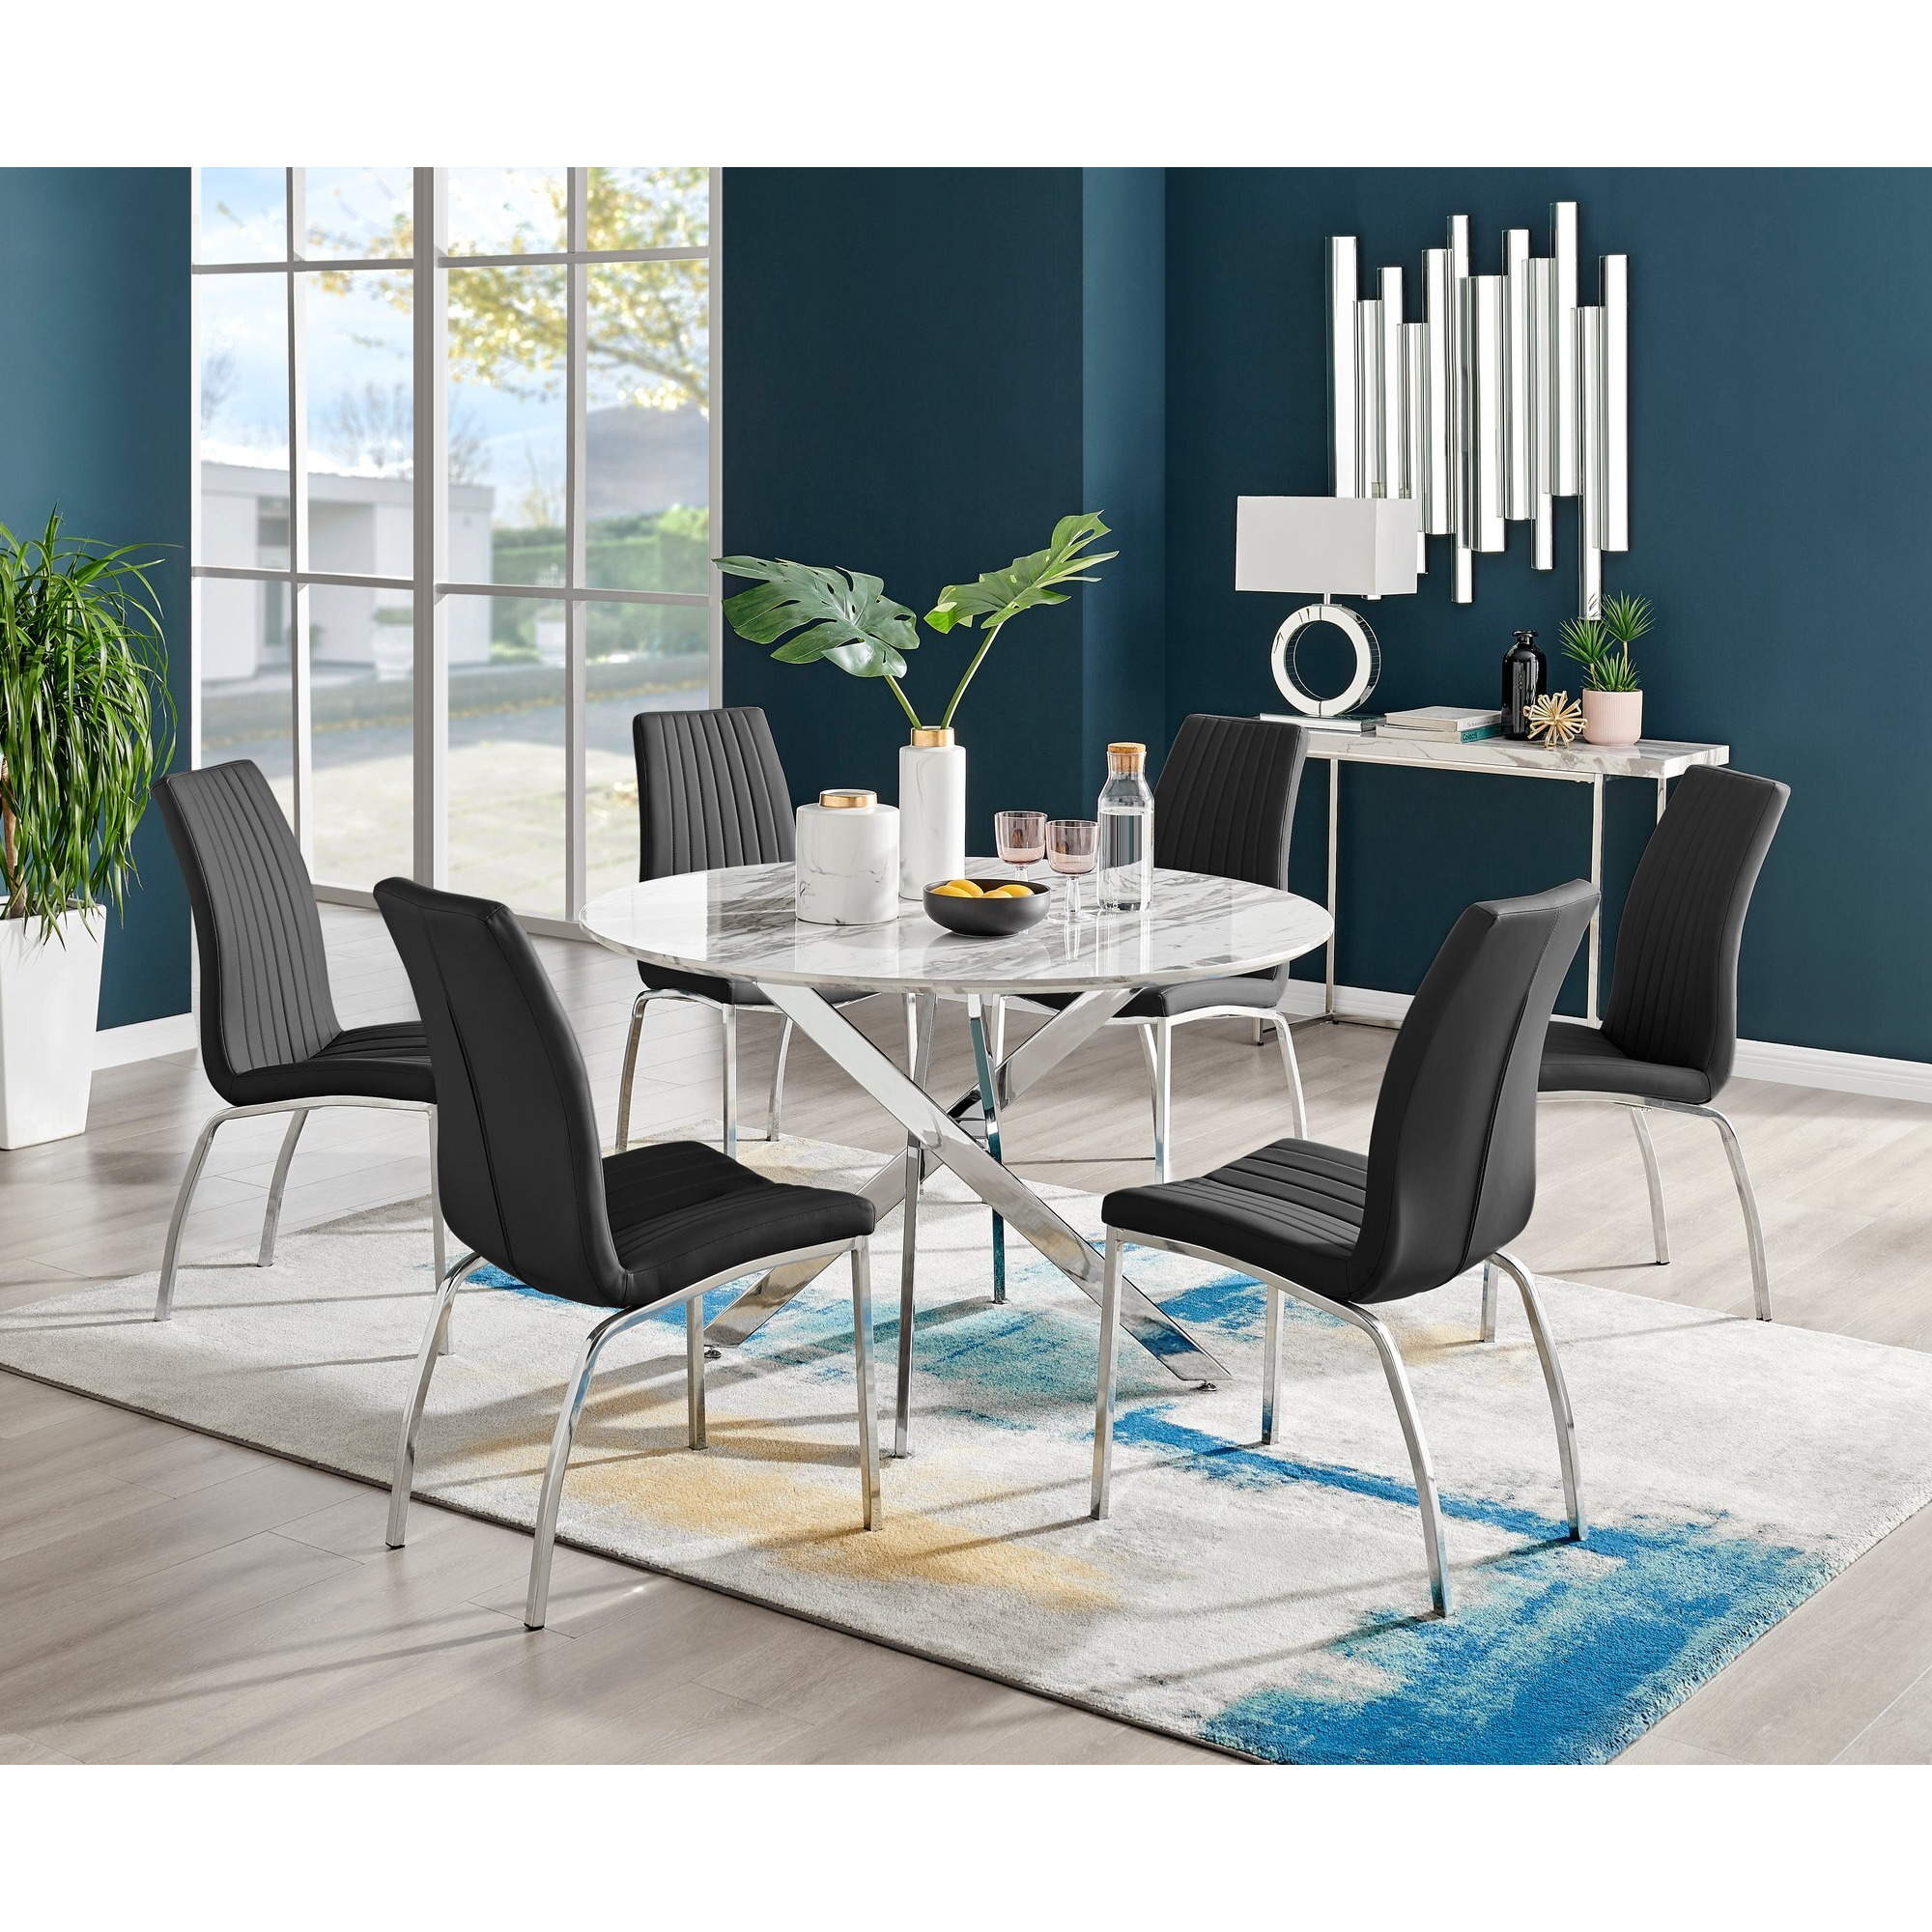 Novara White Marble 120cm Round Dining Table & 6 Isco Chairs